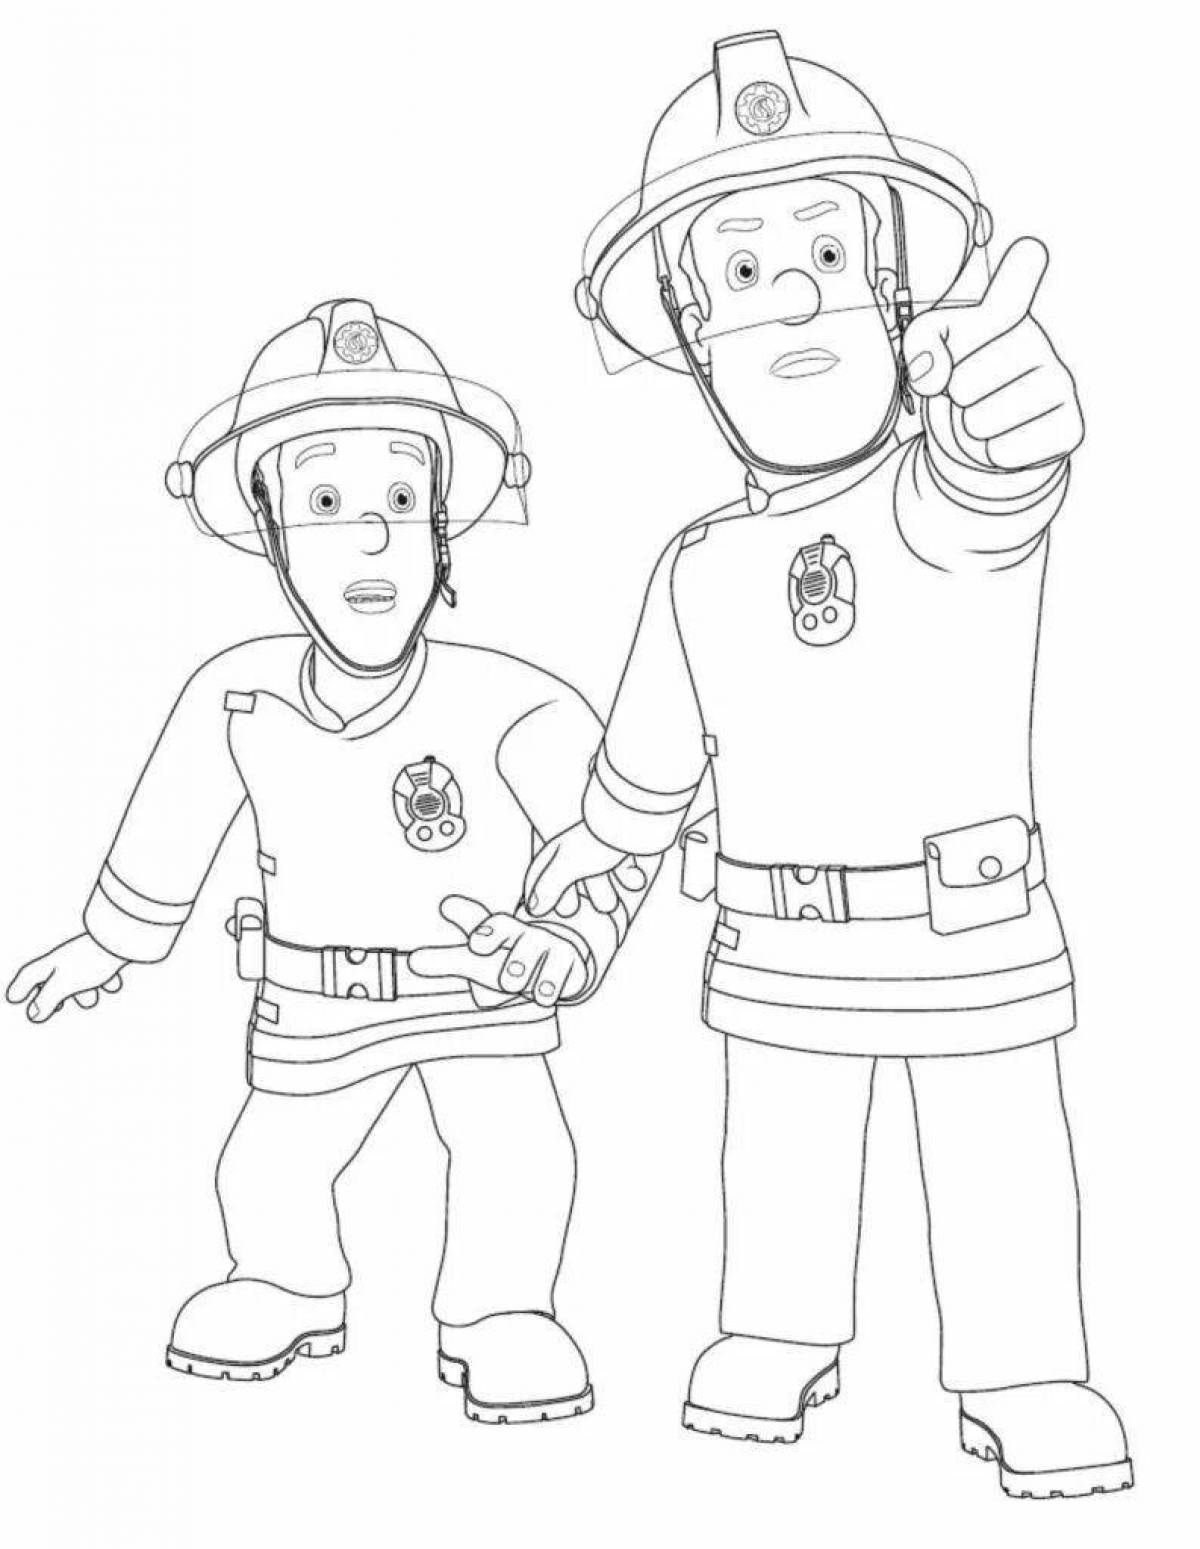 Outstanding fireman sam coloring book for kids